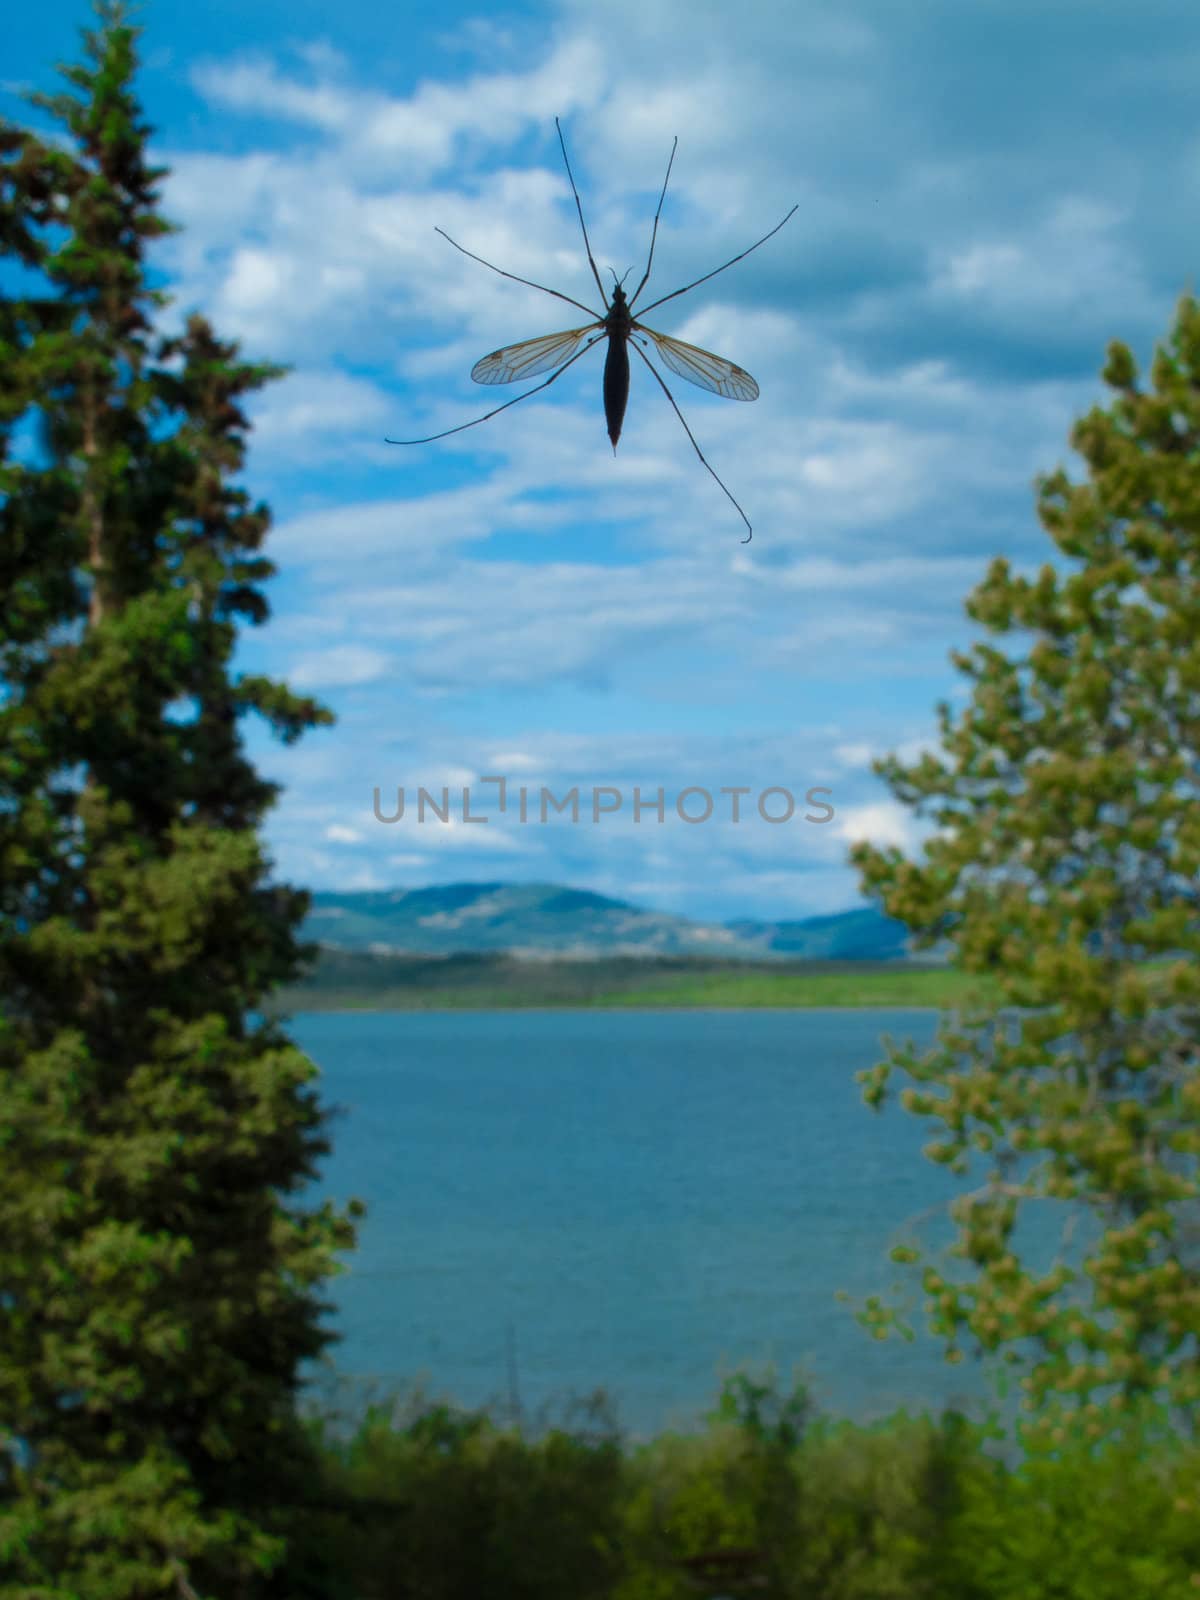 Close-up of crane fly with landscape (trees, forest, lake, hills, blue sky, clouds) in background.